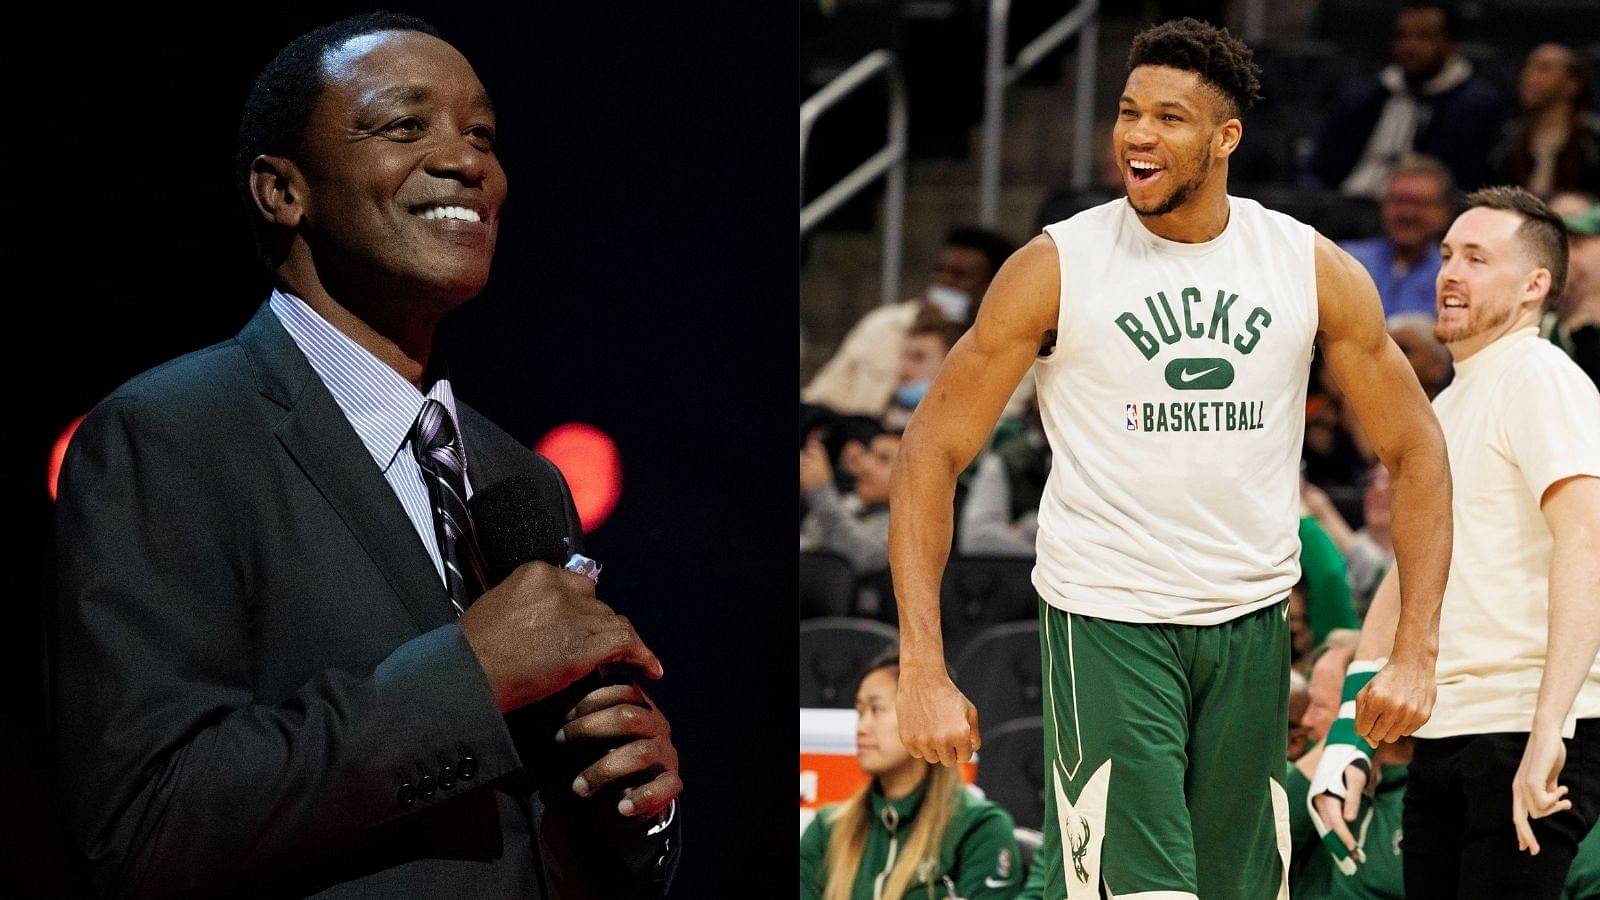 "Oakley stop it with ‘Giannis Antetokounmpo wouldn’t dominate in the 80s'!! He'd be dunkin’ on everyone": Isiah Thomas puts Knicks legend in his place for his take on the Bucks MVP